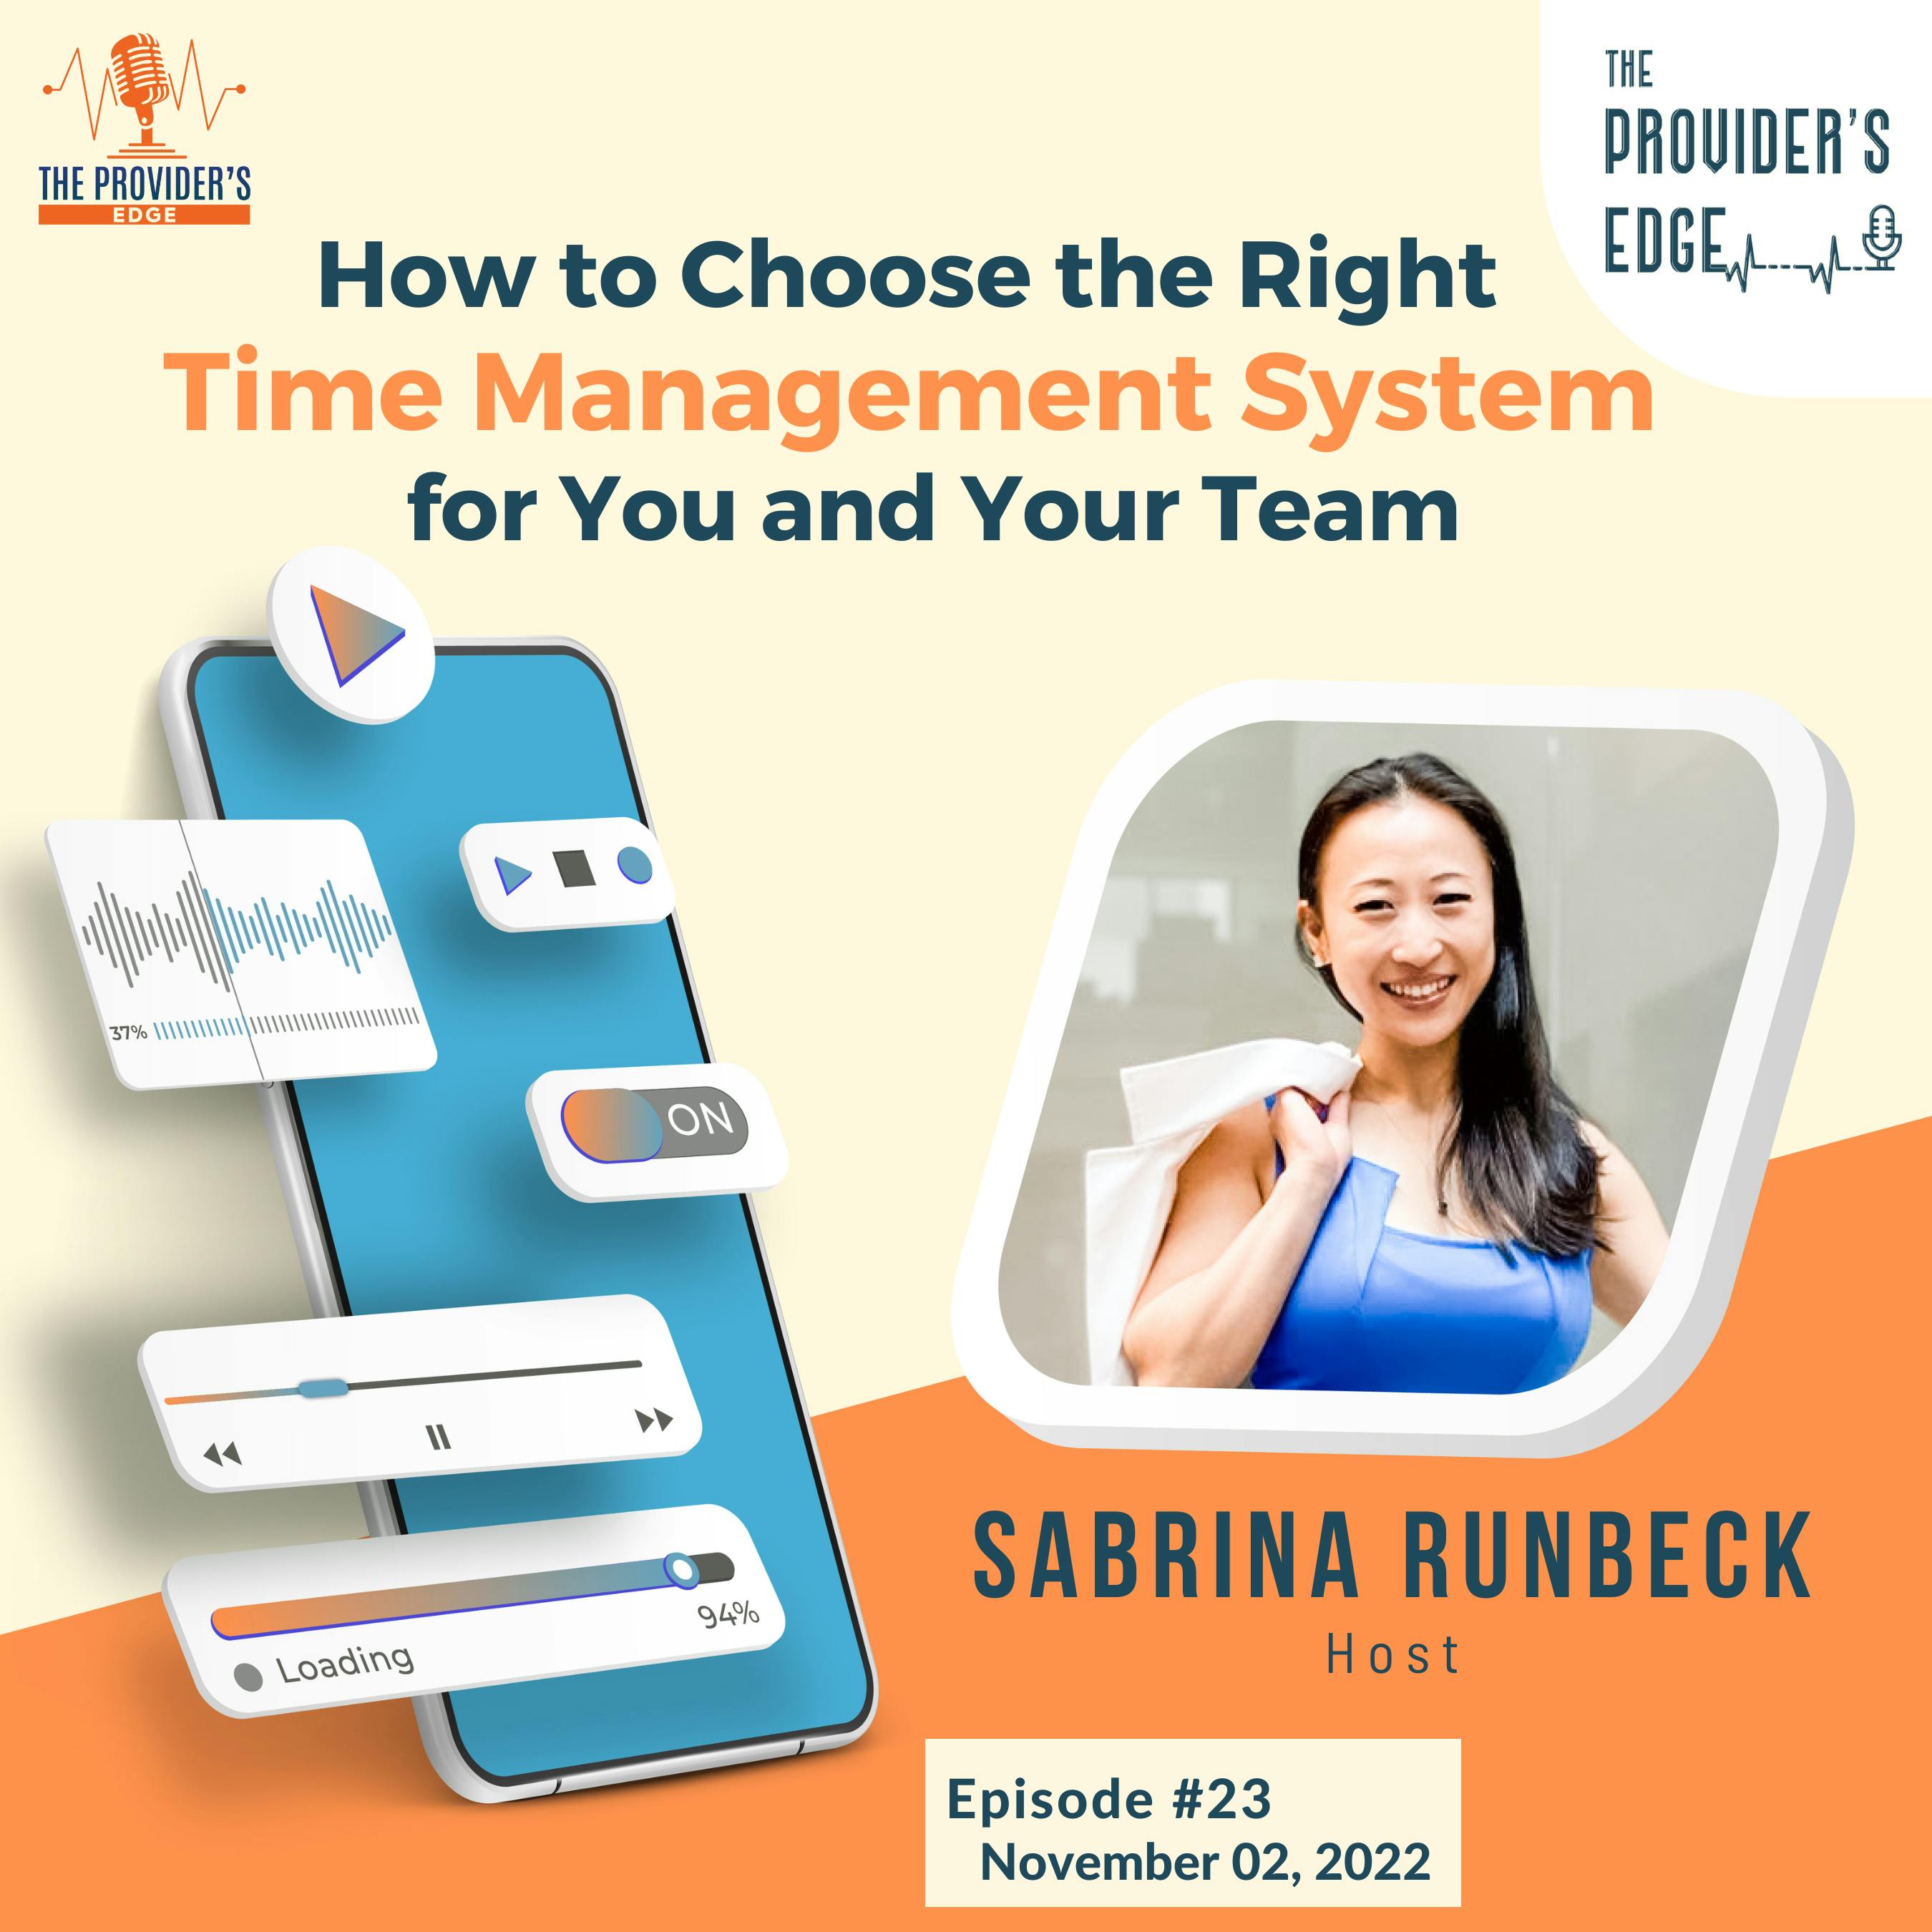 The Providers Edge: How to Choose the Right Time Management System for You and Your Team with Sabrina Runbeck